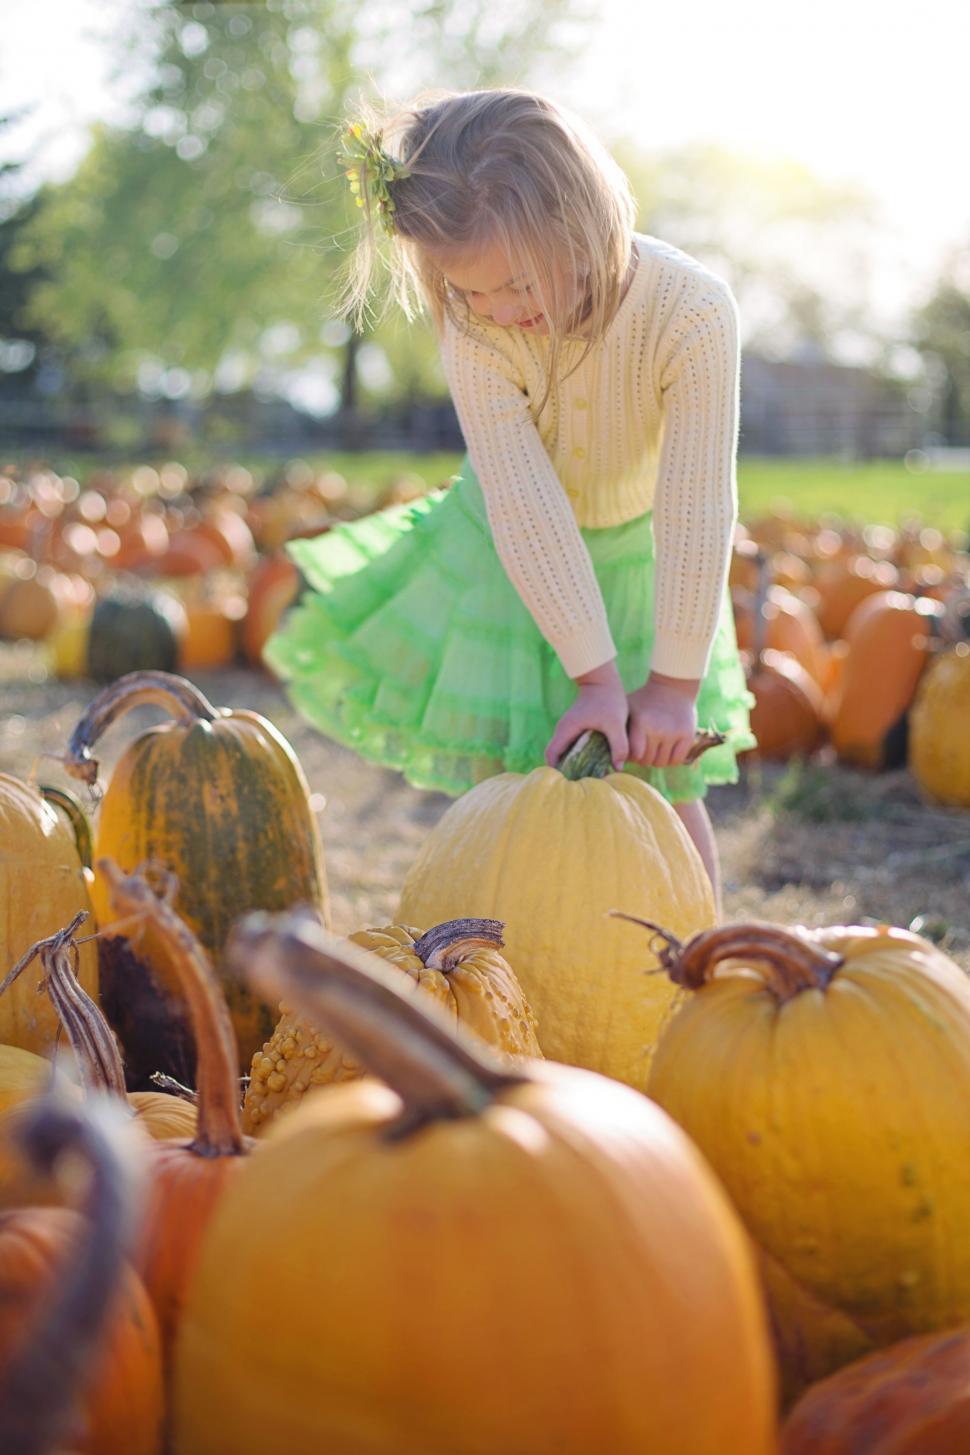 Free Image of Little Girl and Pumpkins  